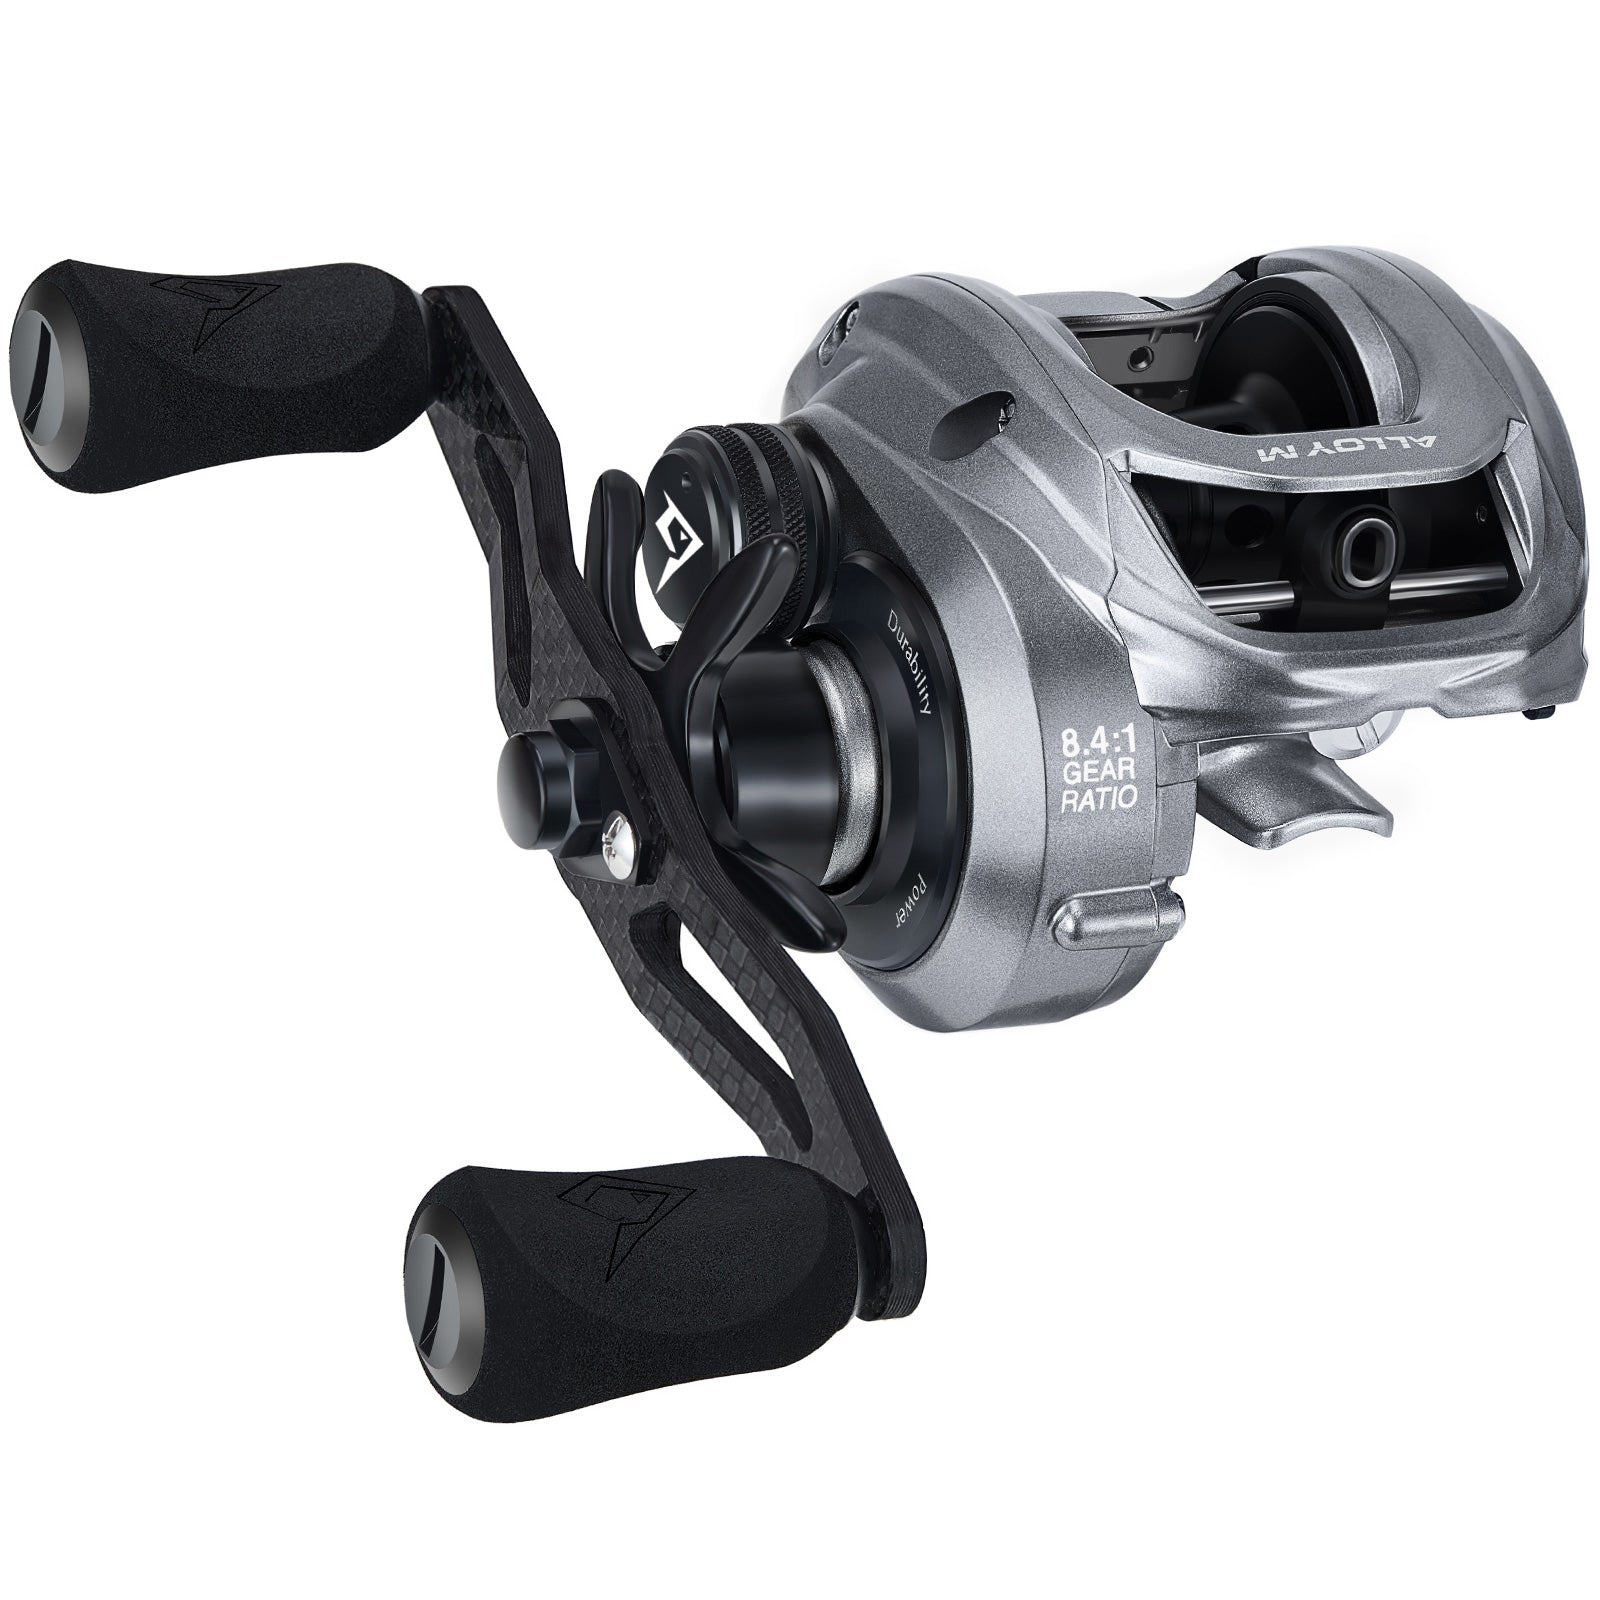 Alloy M Low Profile Saltwater Casting Fishing Reel | Piscifun